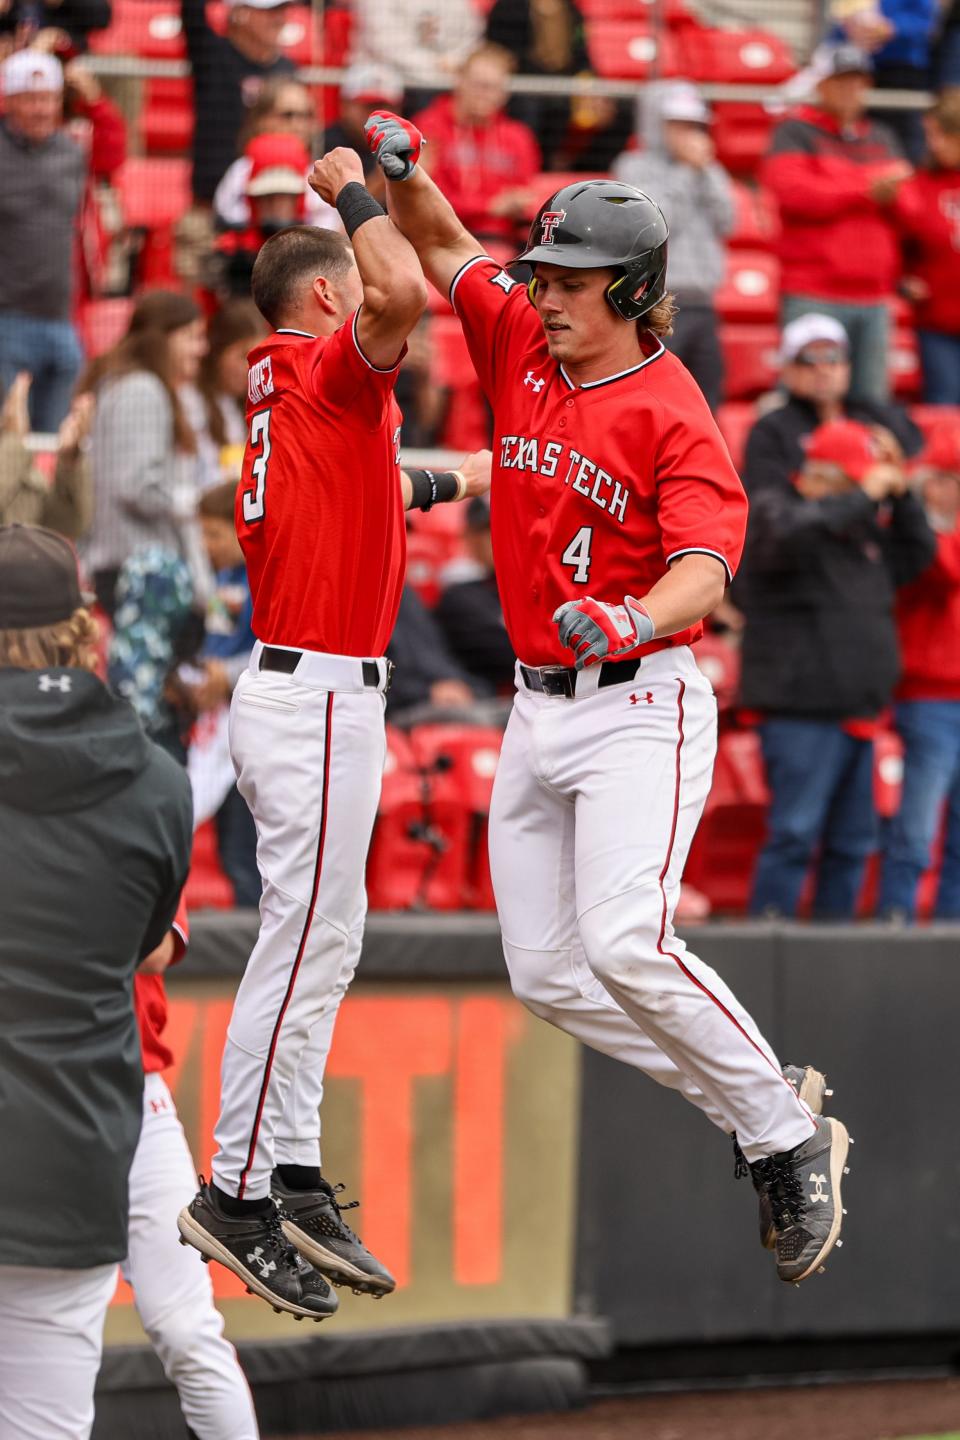 Texas Tech's Kevin Bazzell (4) celebrates hitting a home run Saturday in the Red Raiders' 7-5 loss to Oklahoma at Dan Law Field/Rip Griffin Park. The series finale is scheduled for 2 p.m. Sunday.